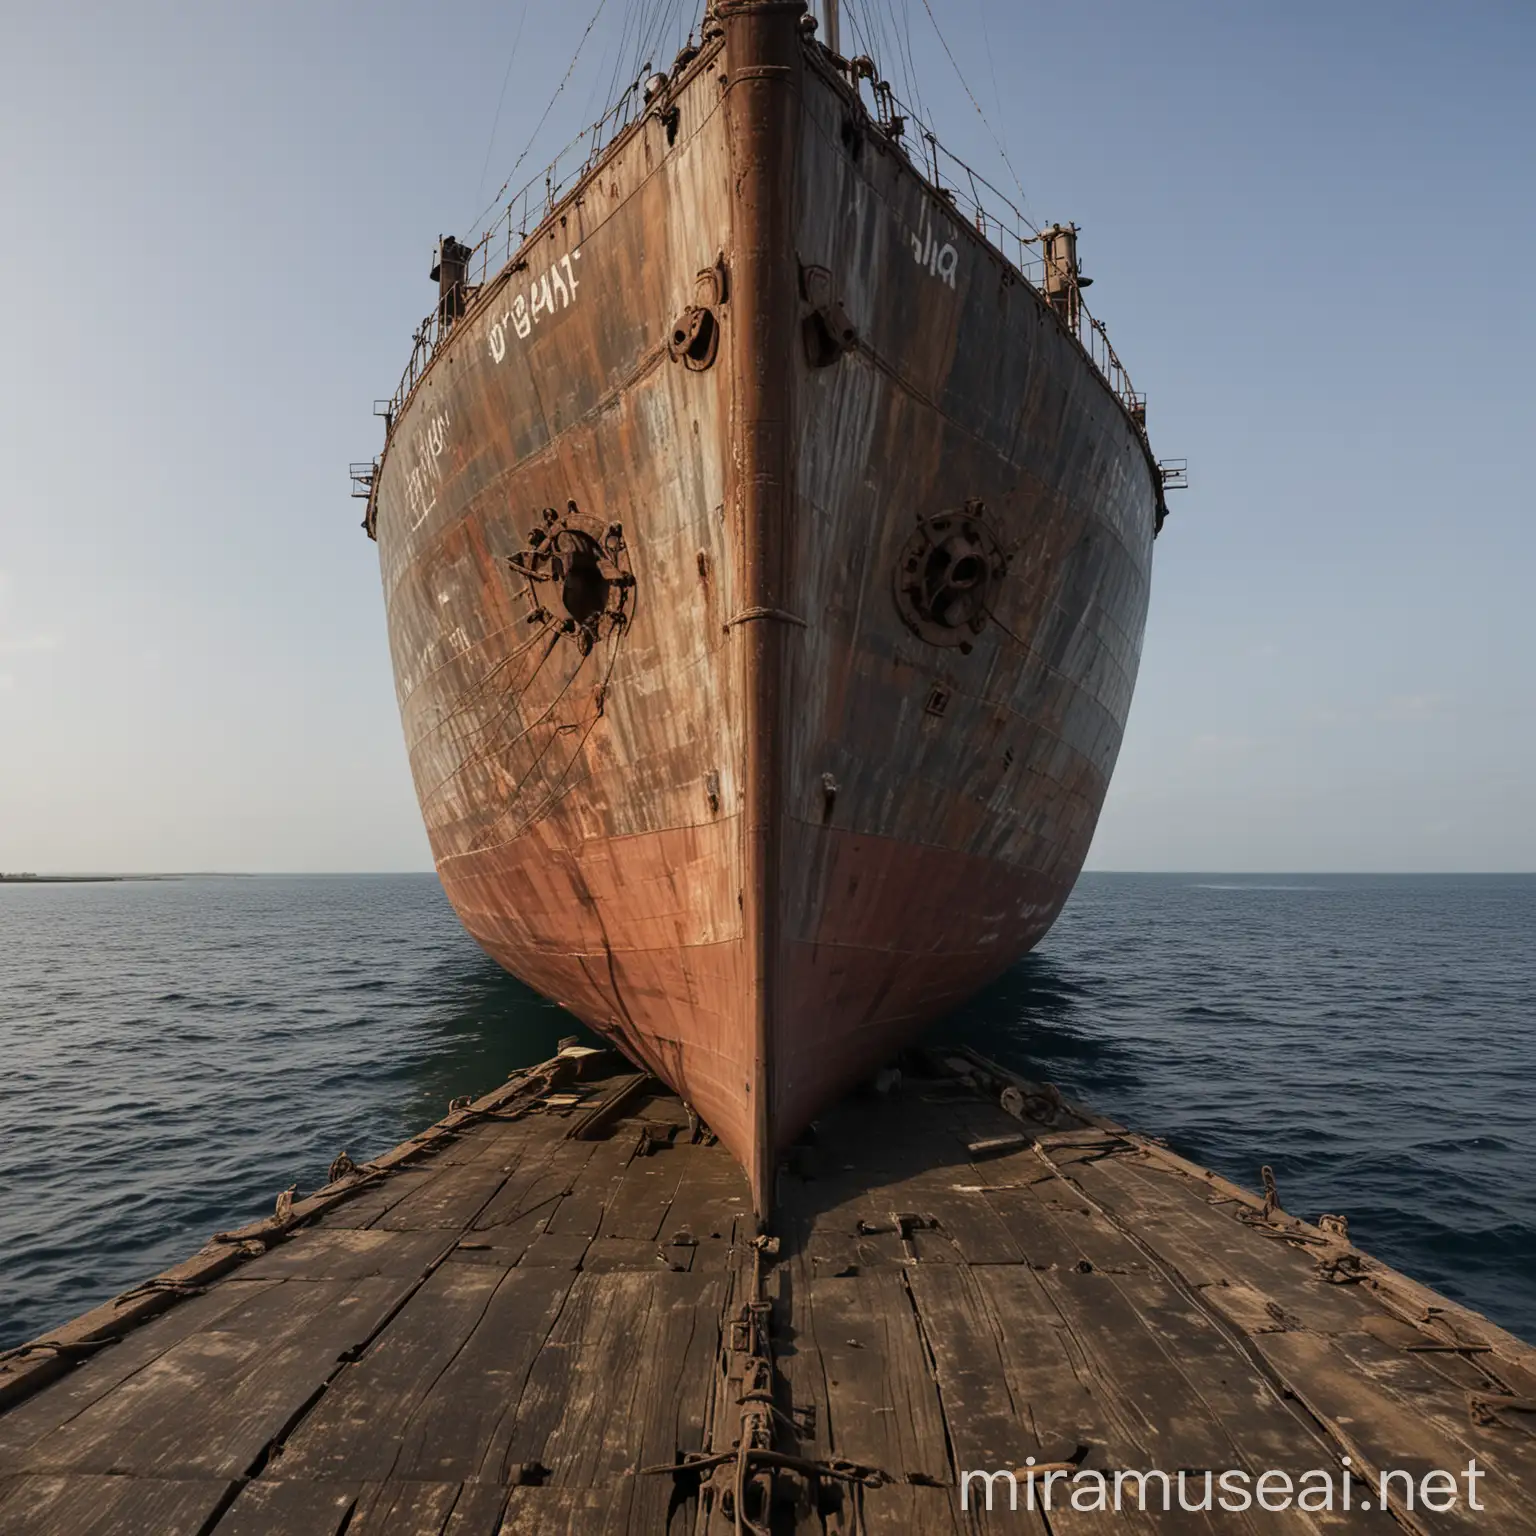 Bow of Old Cargo Ship Facing Left in WideAngle View